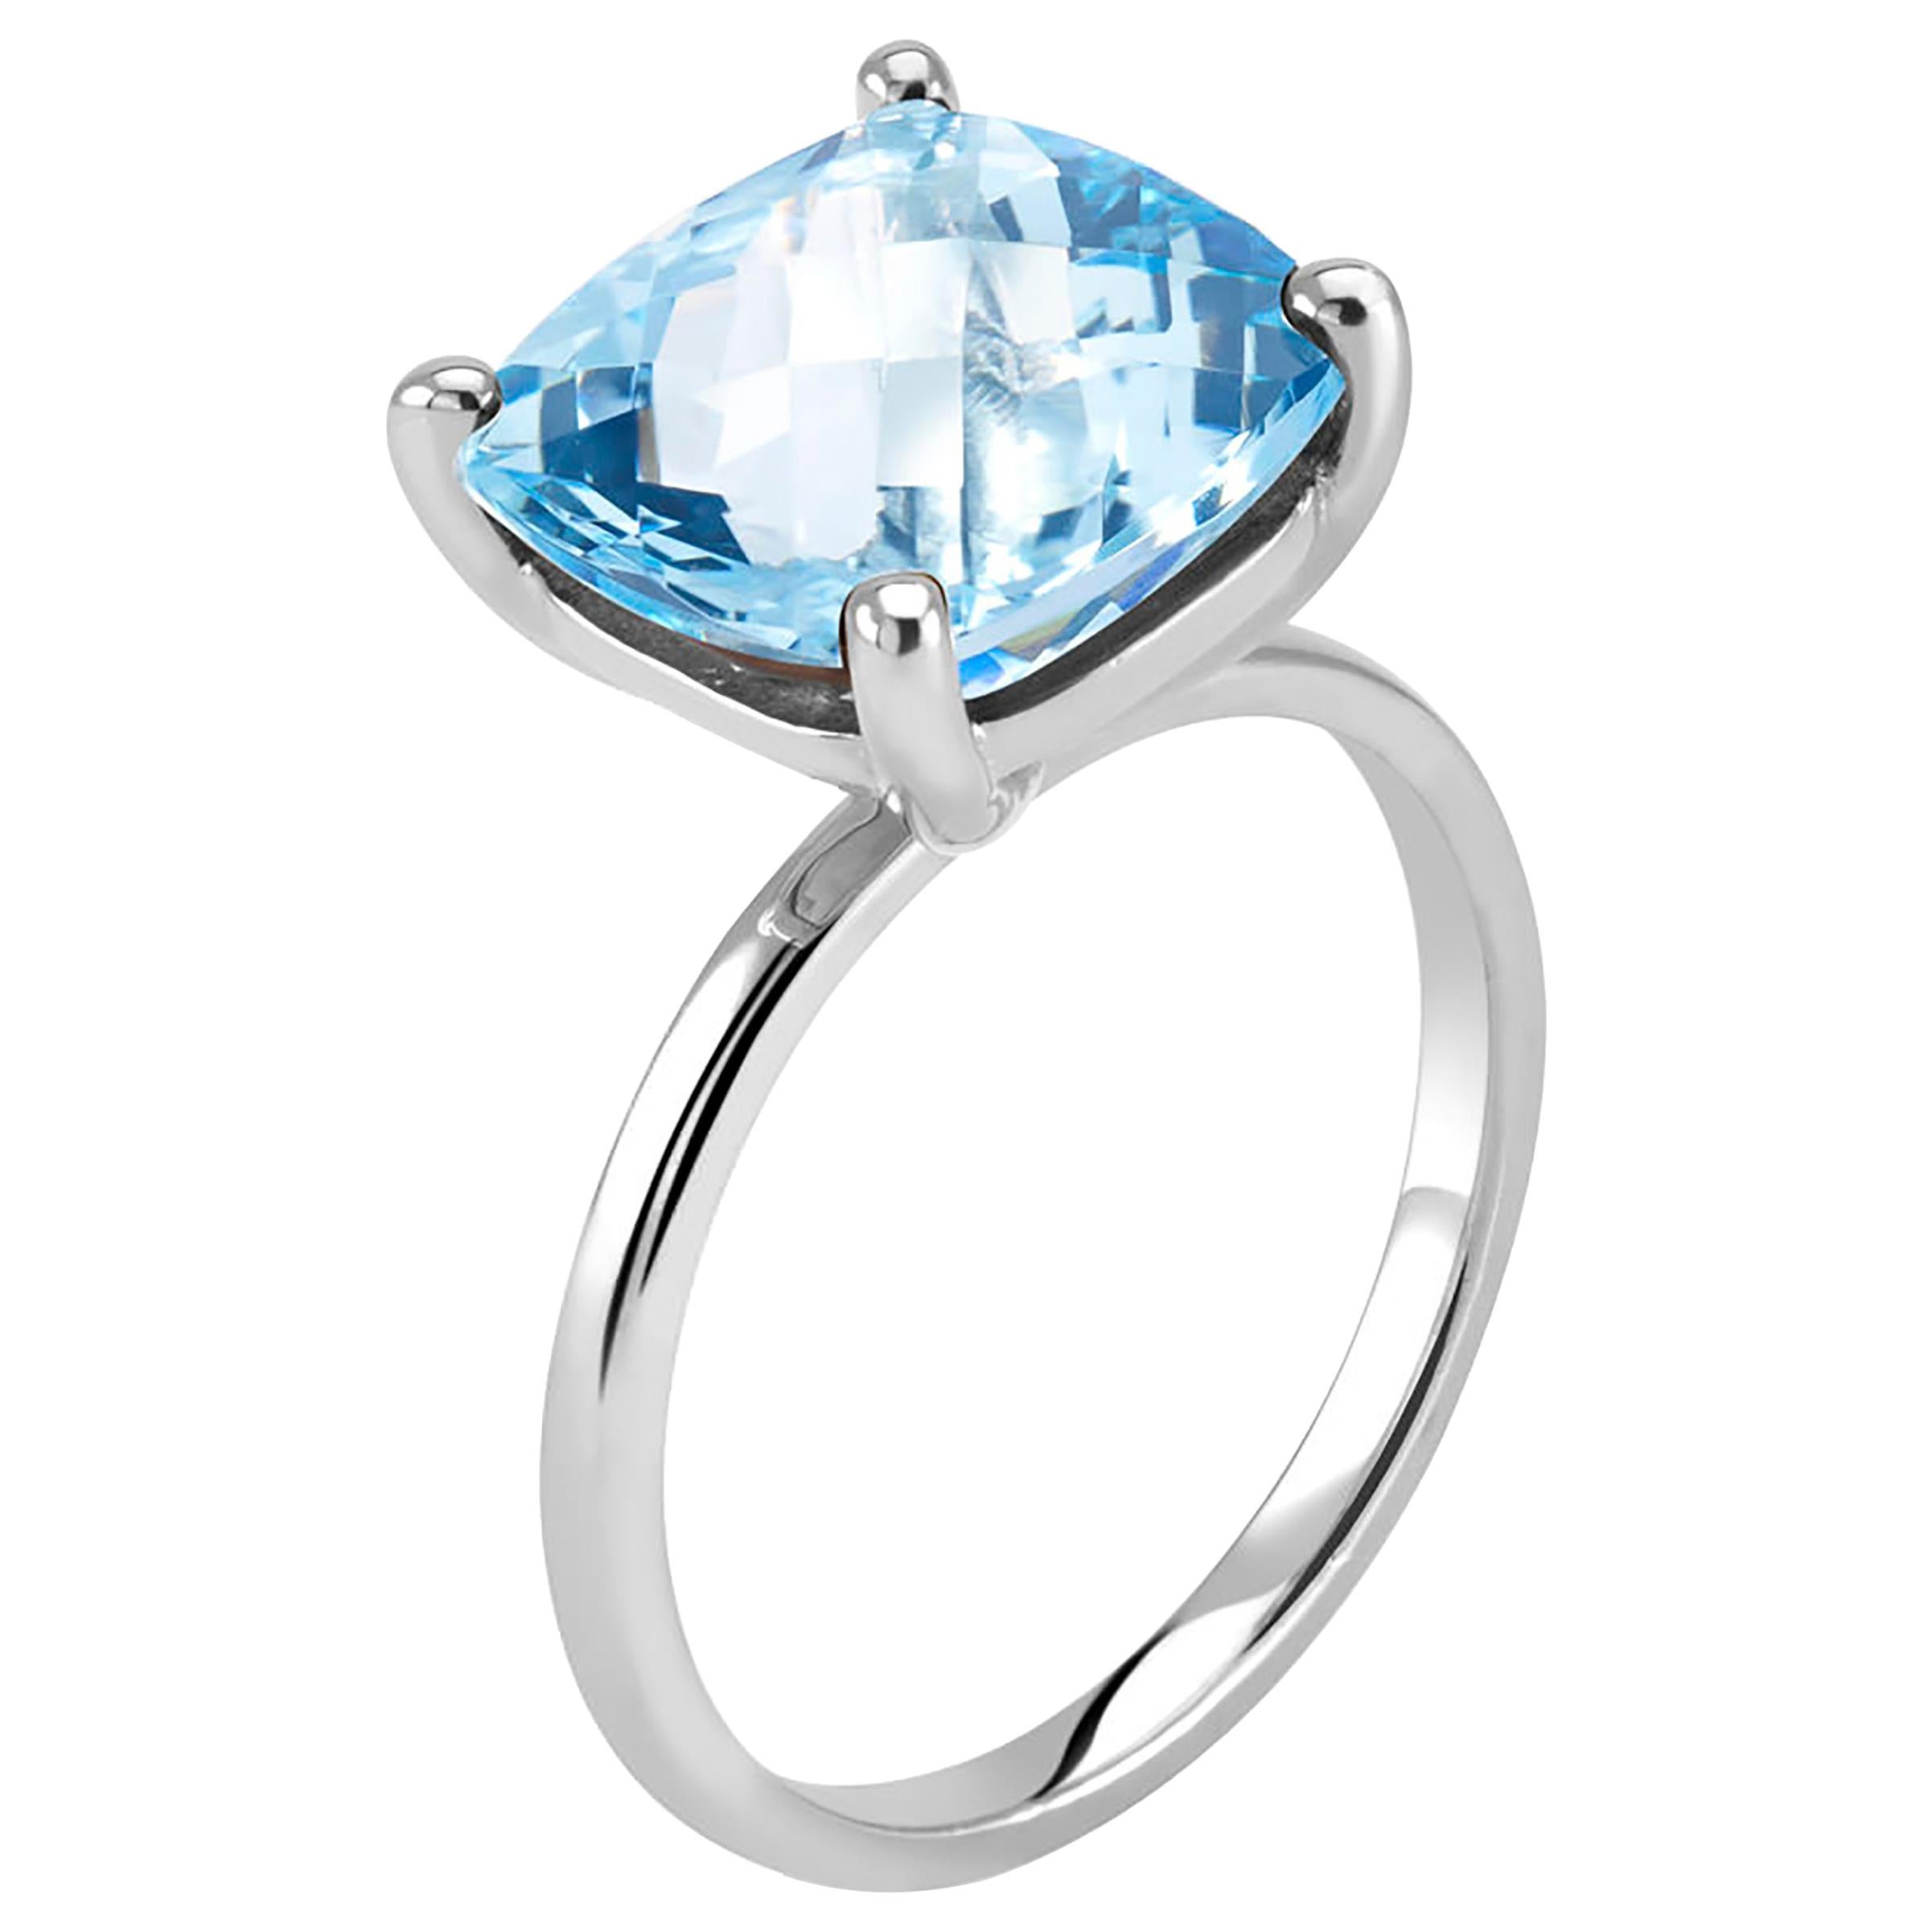 Cushion Shaped Four Carat Blue Topaz Solitaire Sterling Silver Ring